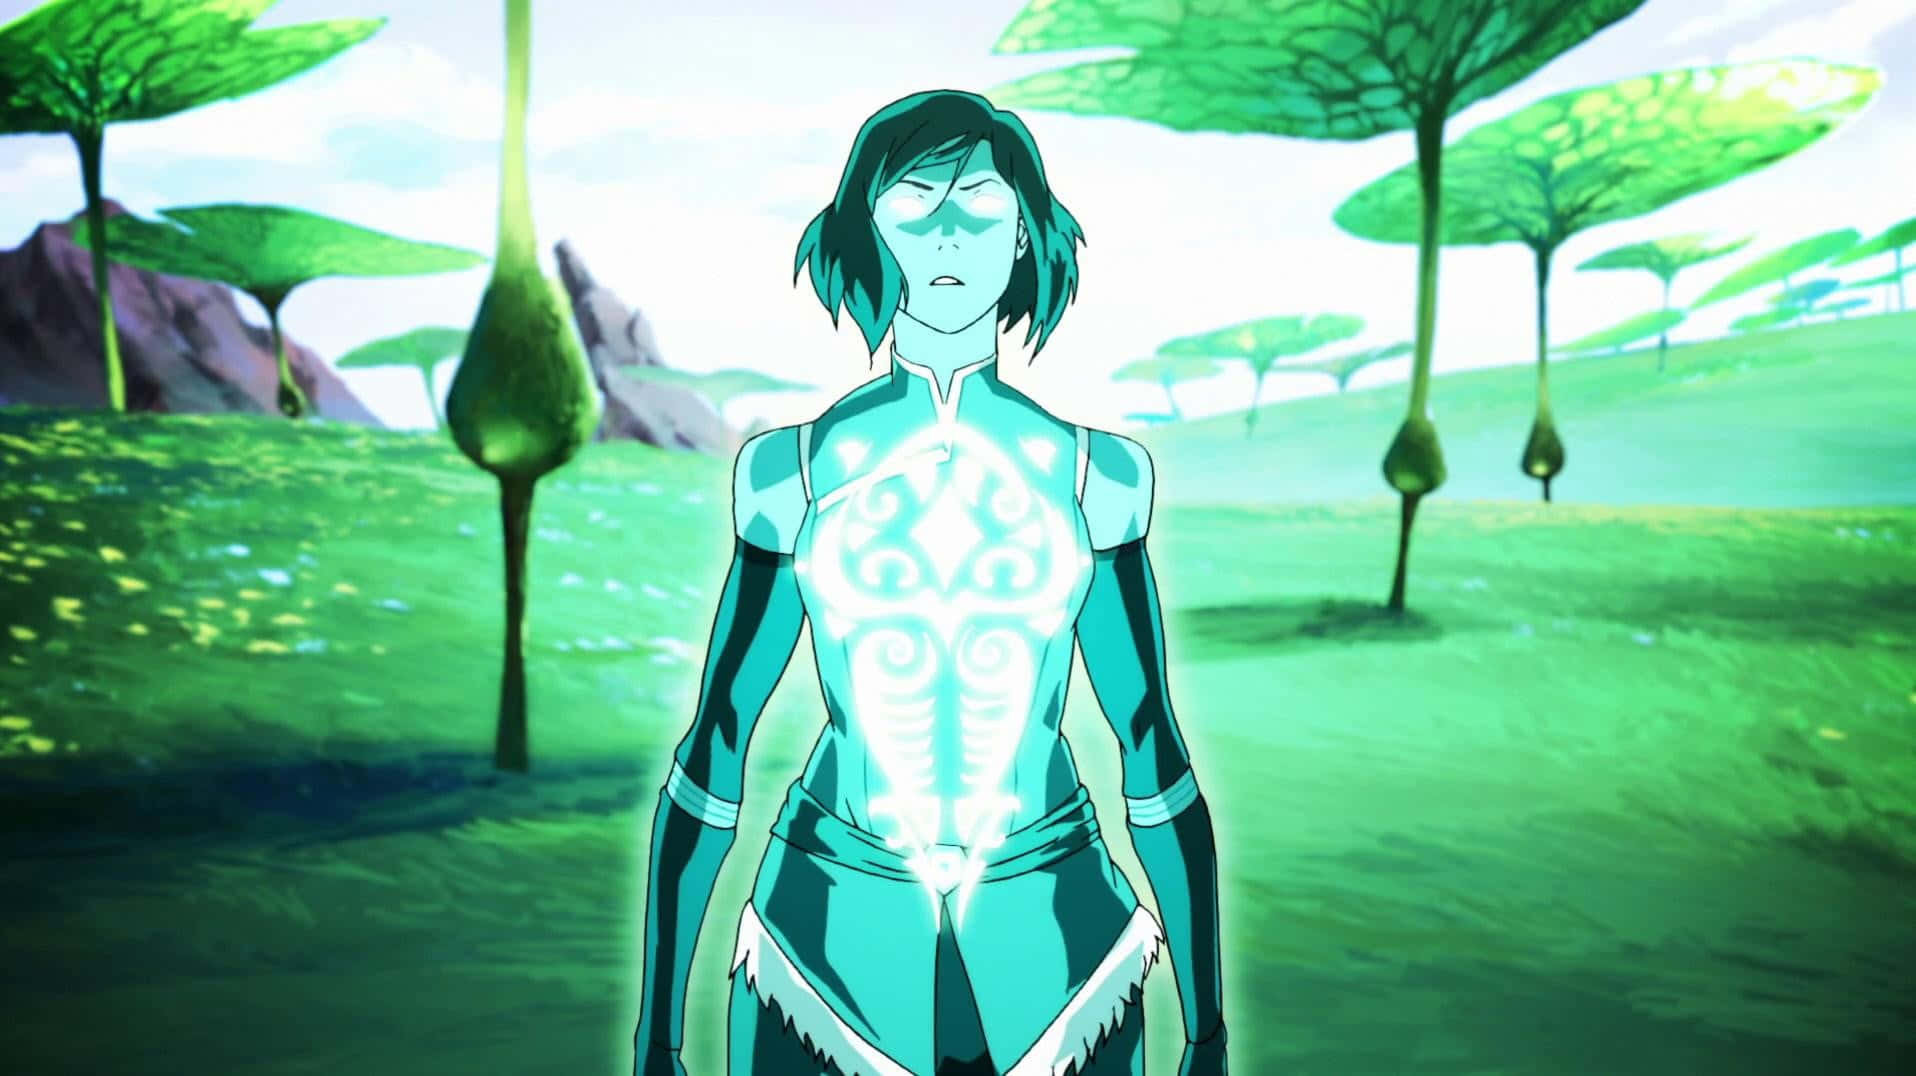 Korra Taking Action To Protect The Avatar